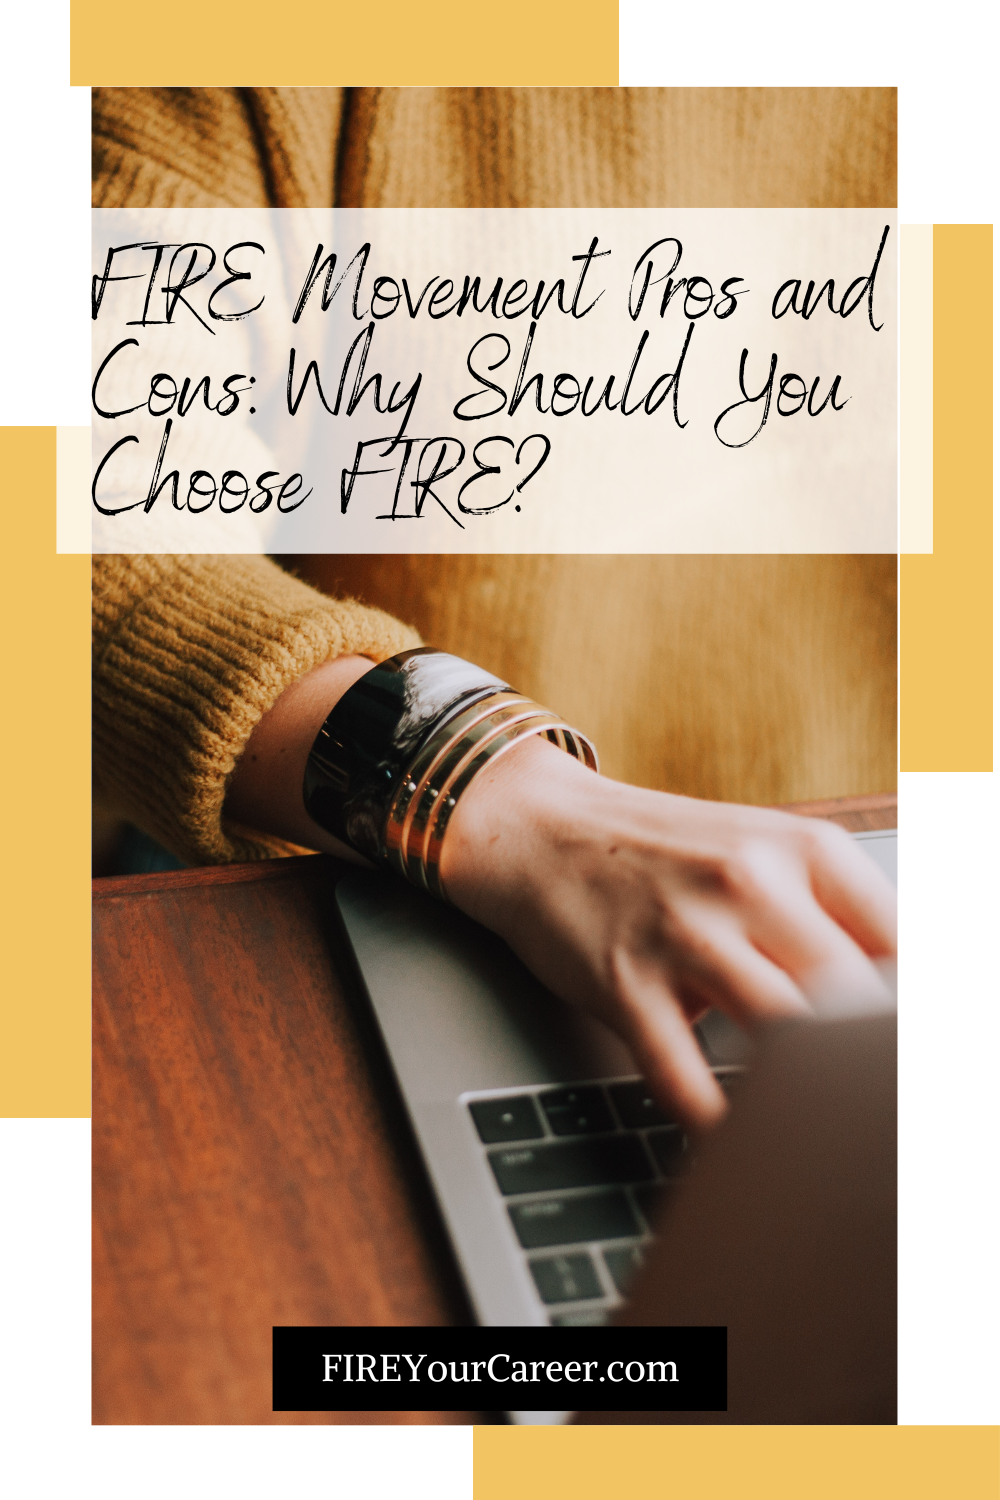 FIRE Movement Pros and Cons Why Should You Choose FIRE